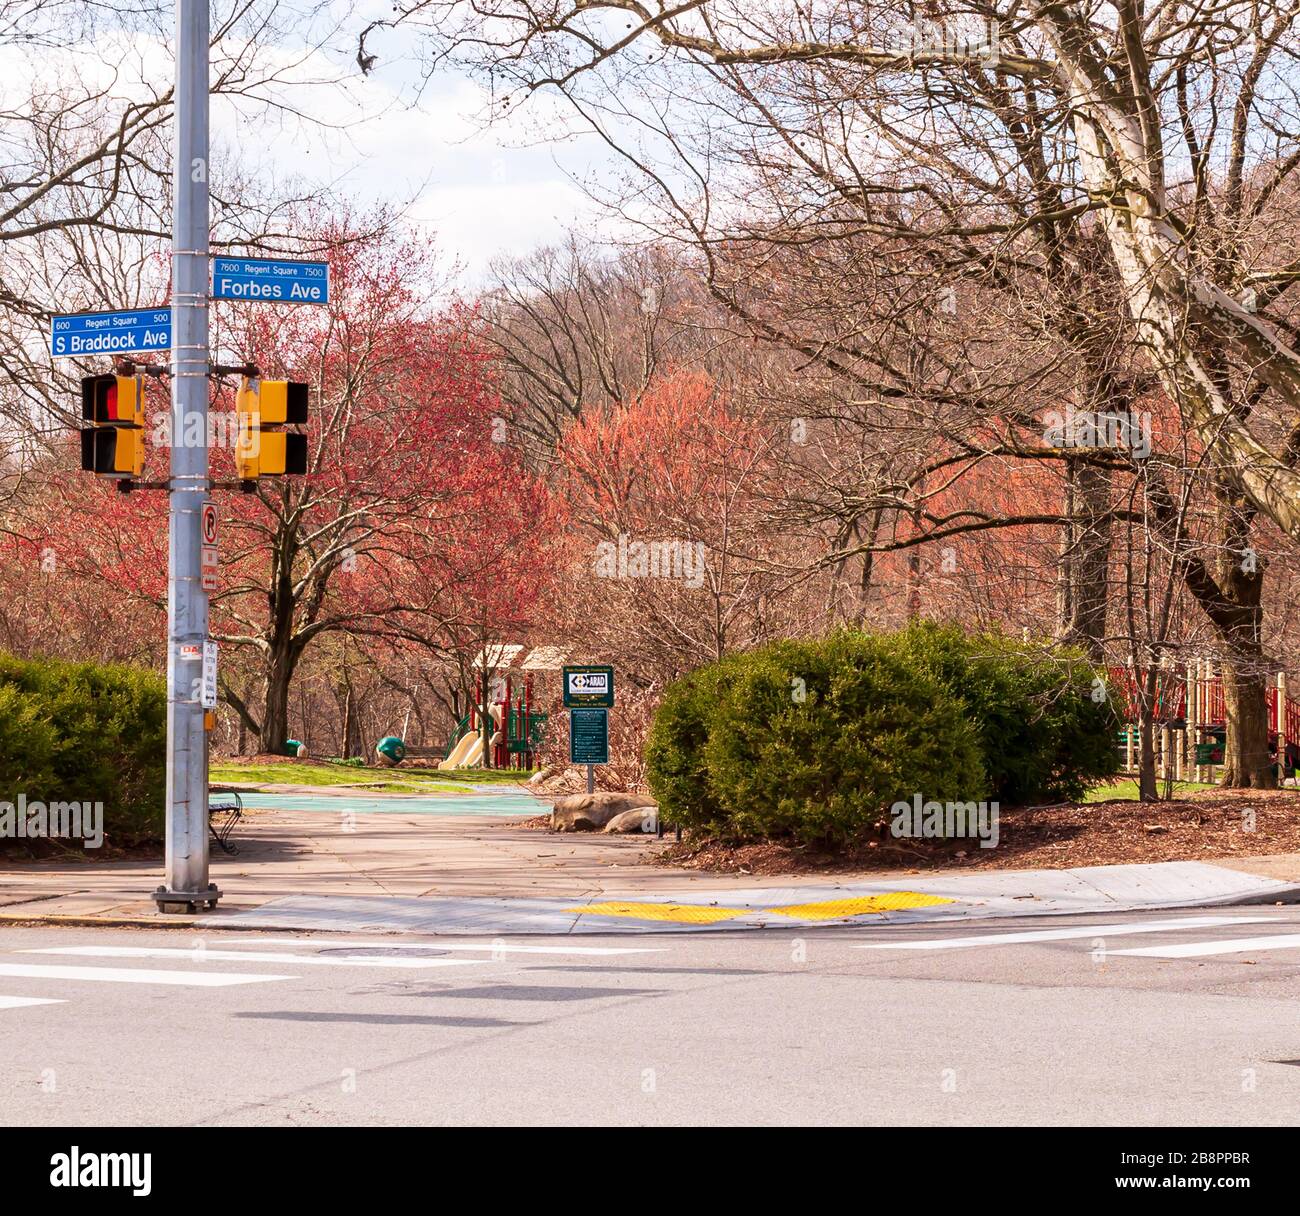 The entrance to the Frick Park playground at the intersection of Forbes and South Braddock Avenues, Pittsburgh, Pennsylvania, USA Stock Photo